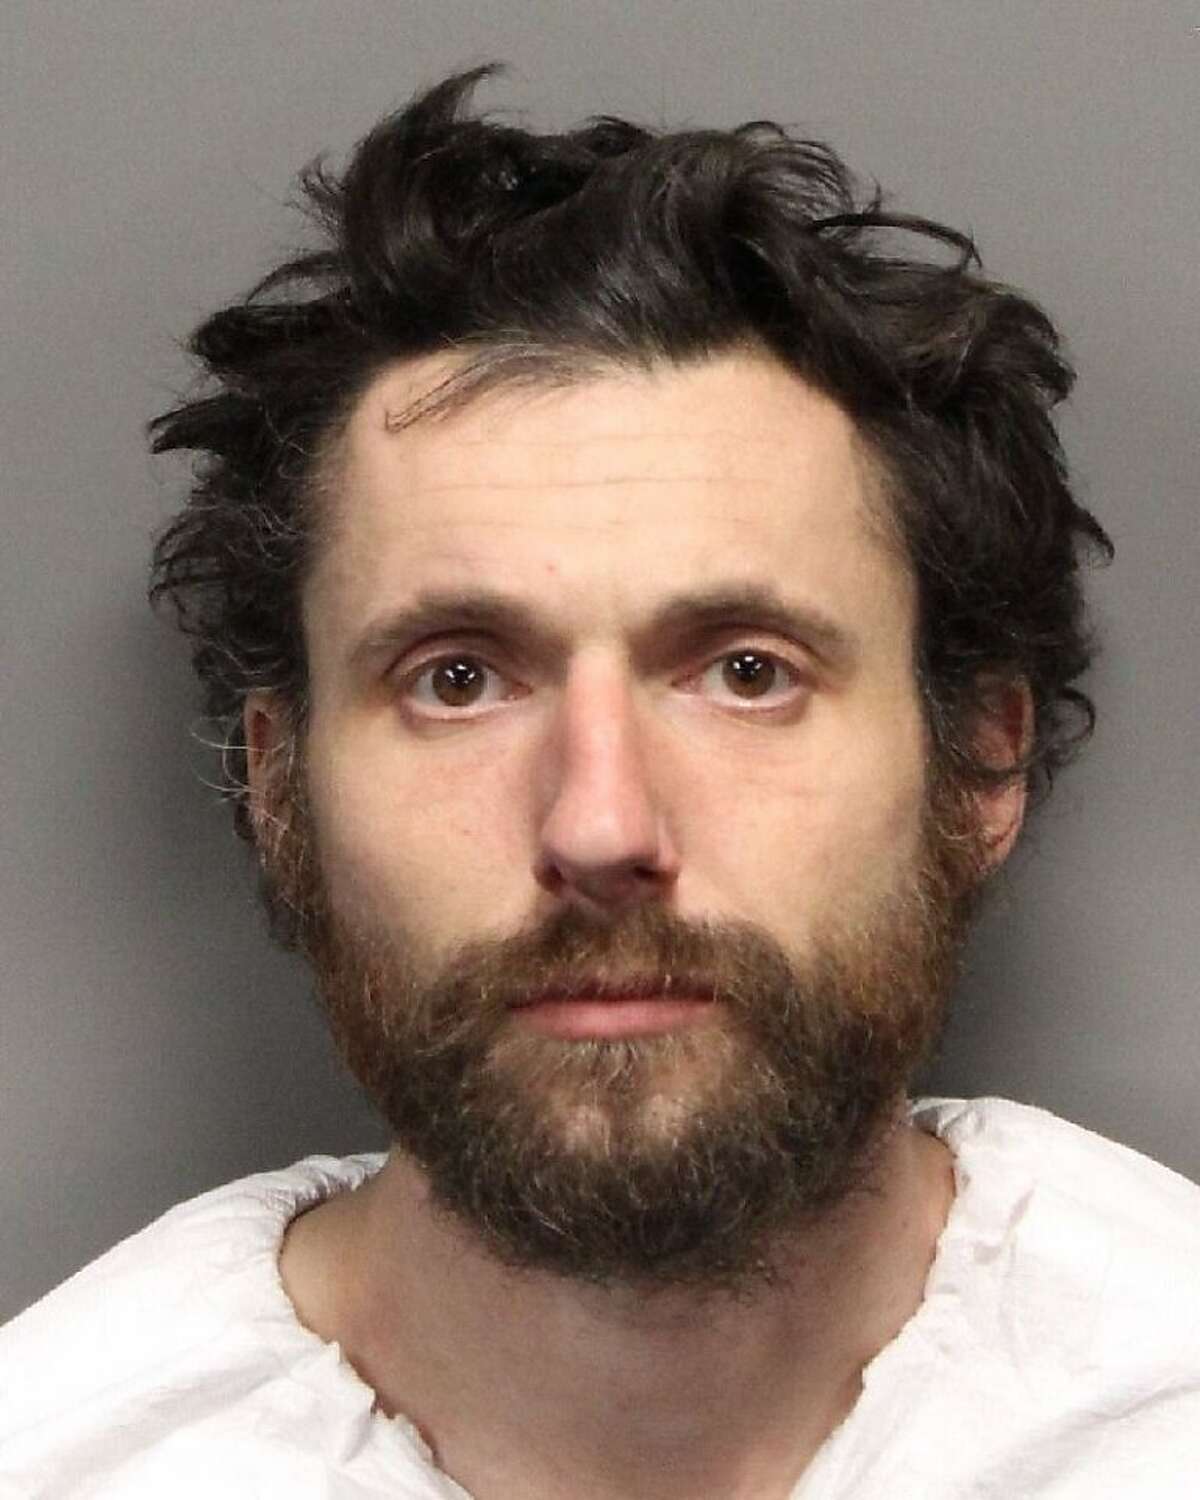 Daniel Hill, arrested in the August 2010 beating death in Golden Gate Park of Michael Ponder.